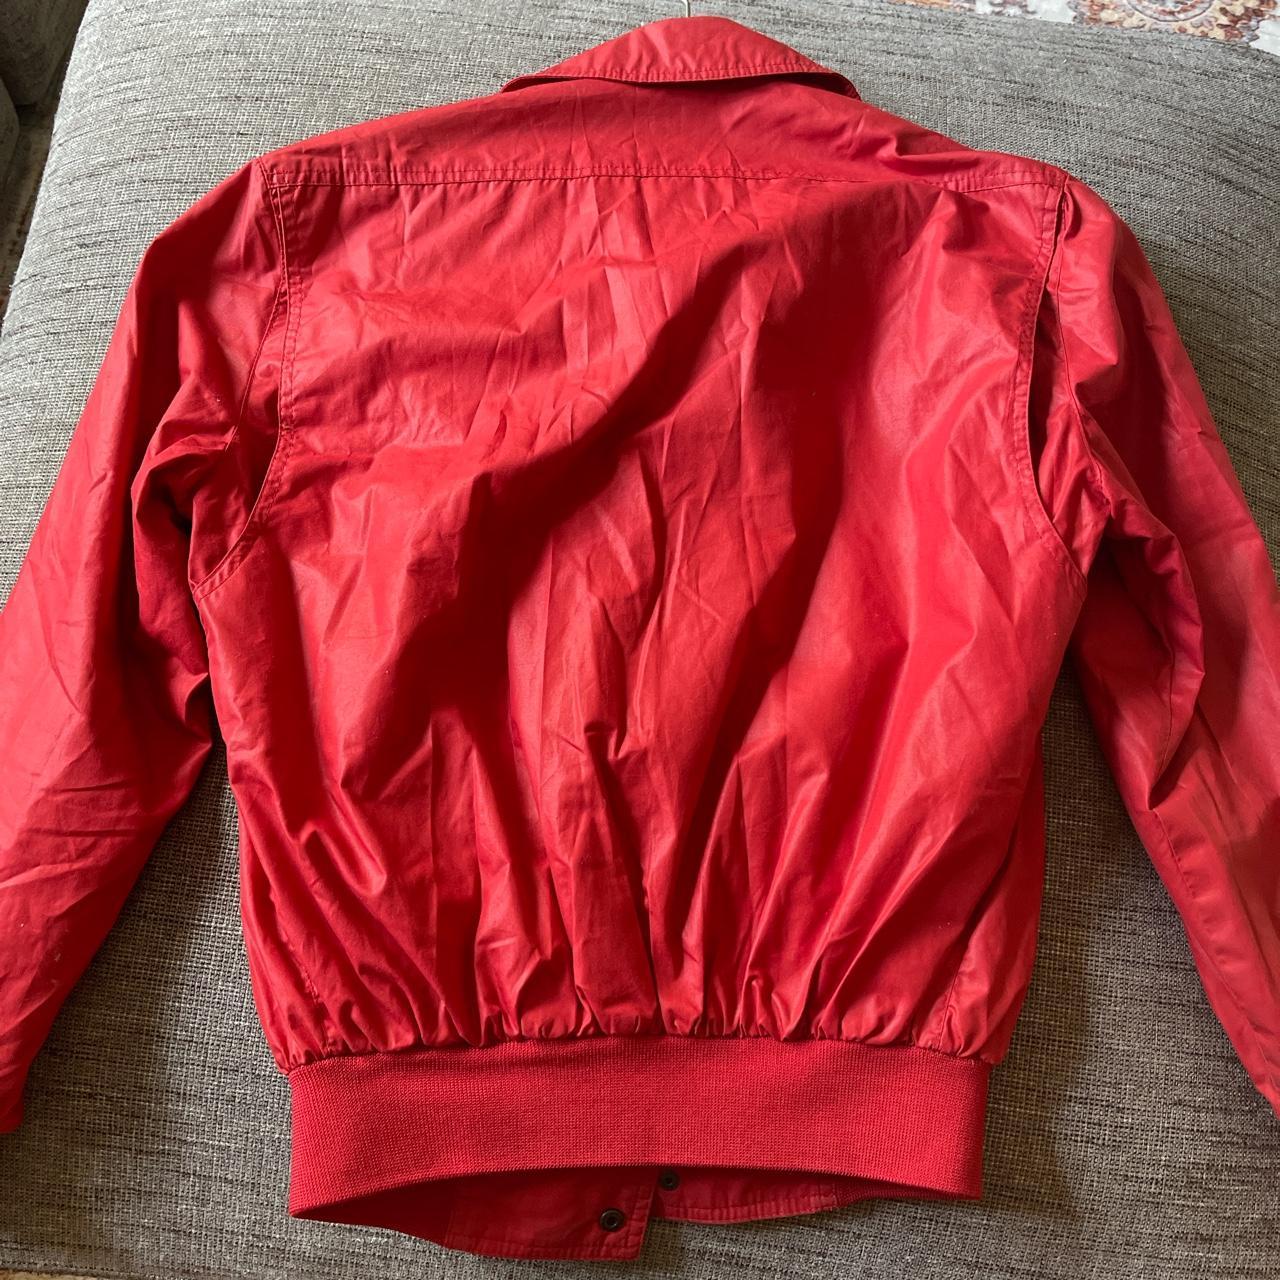 Perfect Condition Members Only Classic Iconic Racer - Depop